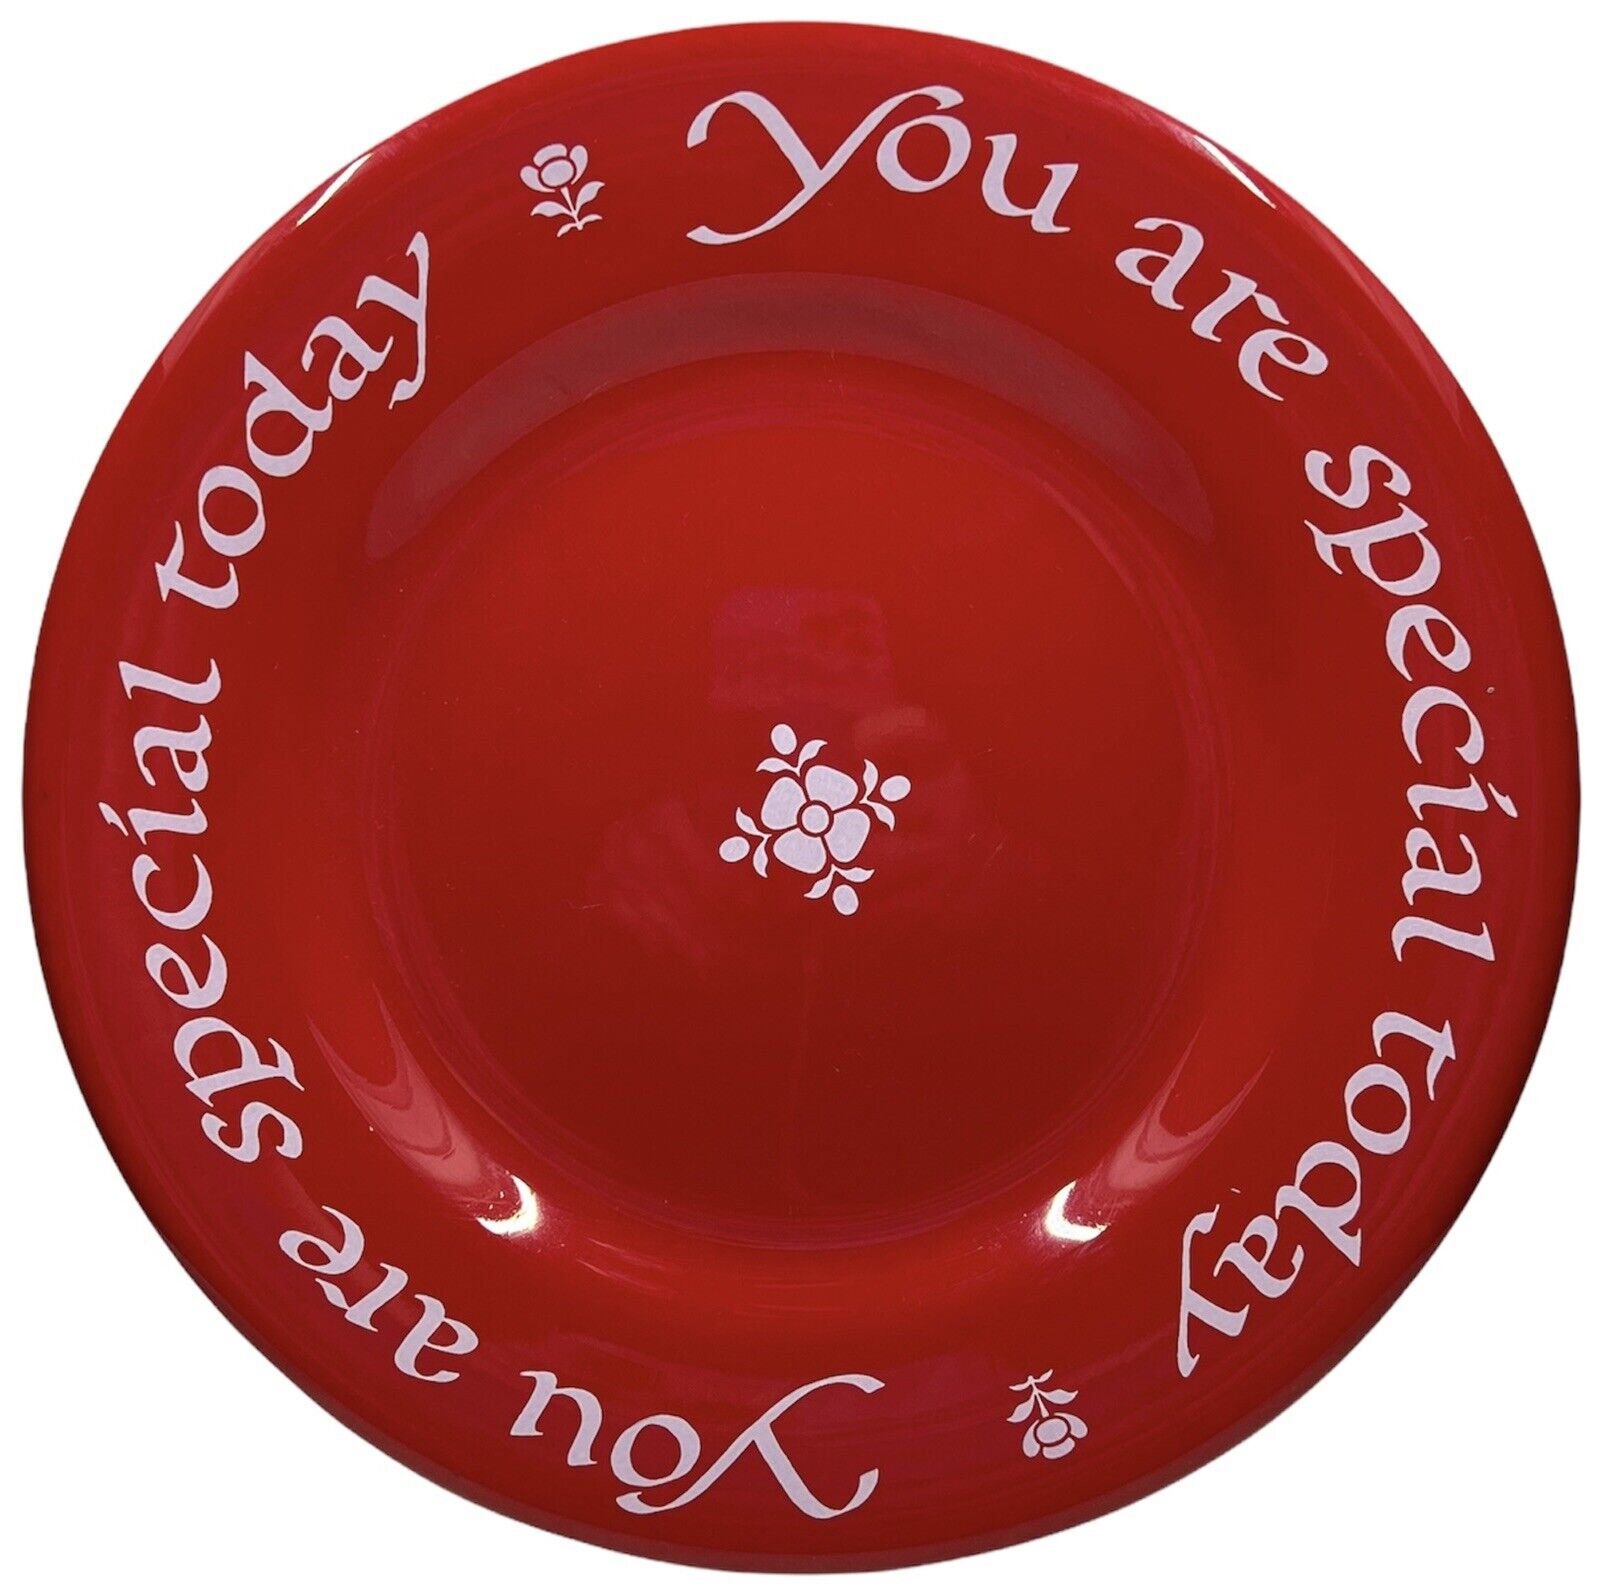 Vintage 1979 You Are Special Today Birthday Plate USA Original Red Plate Co